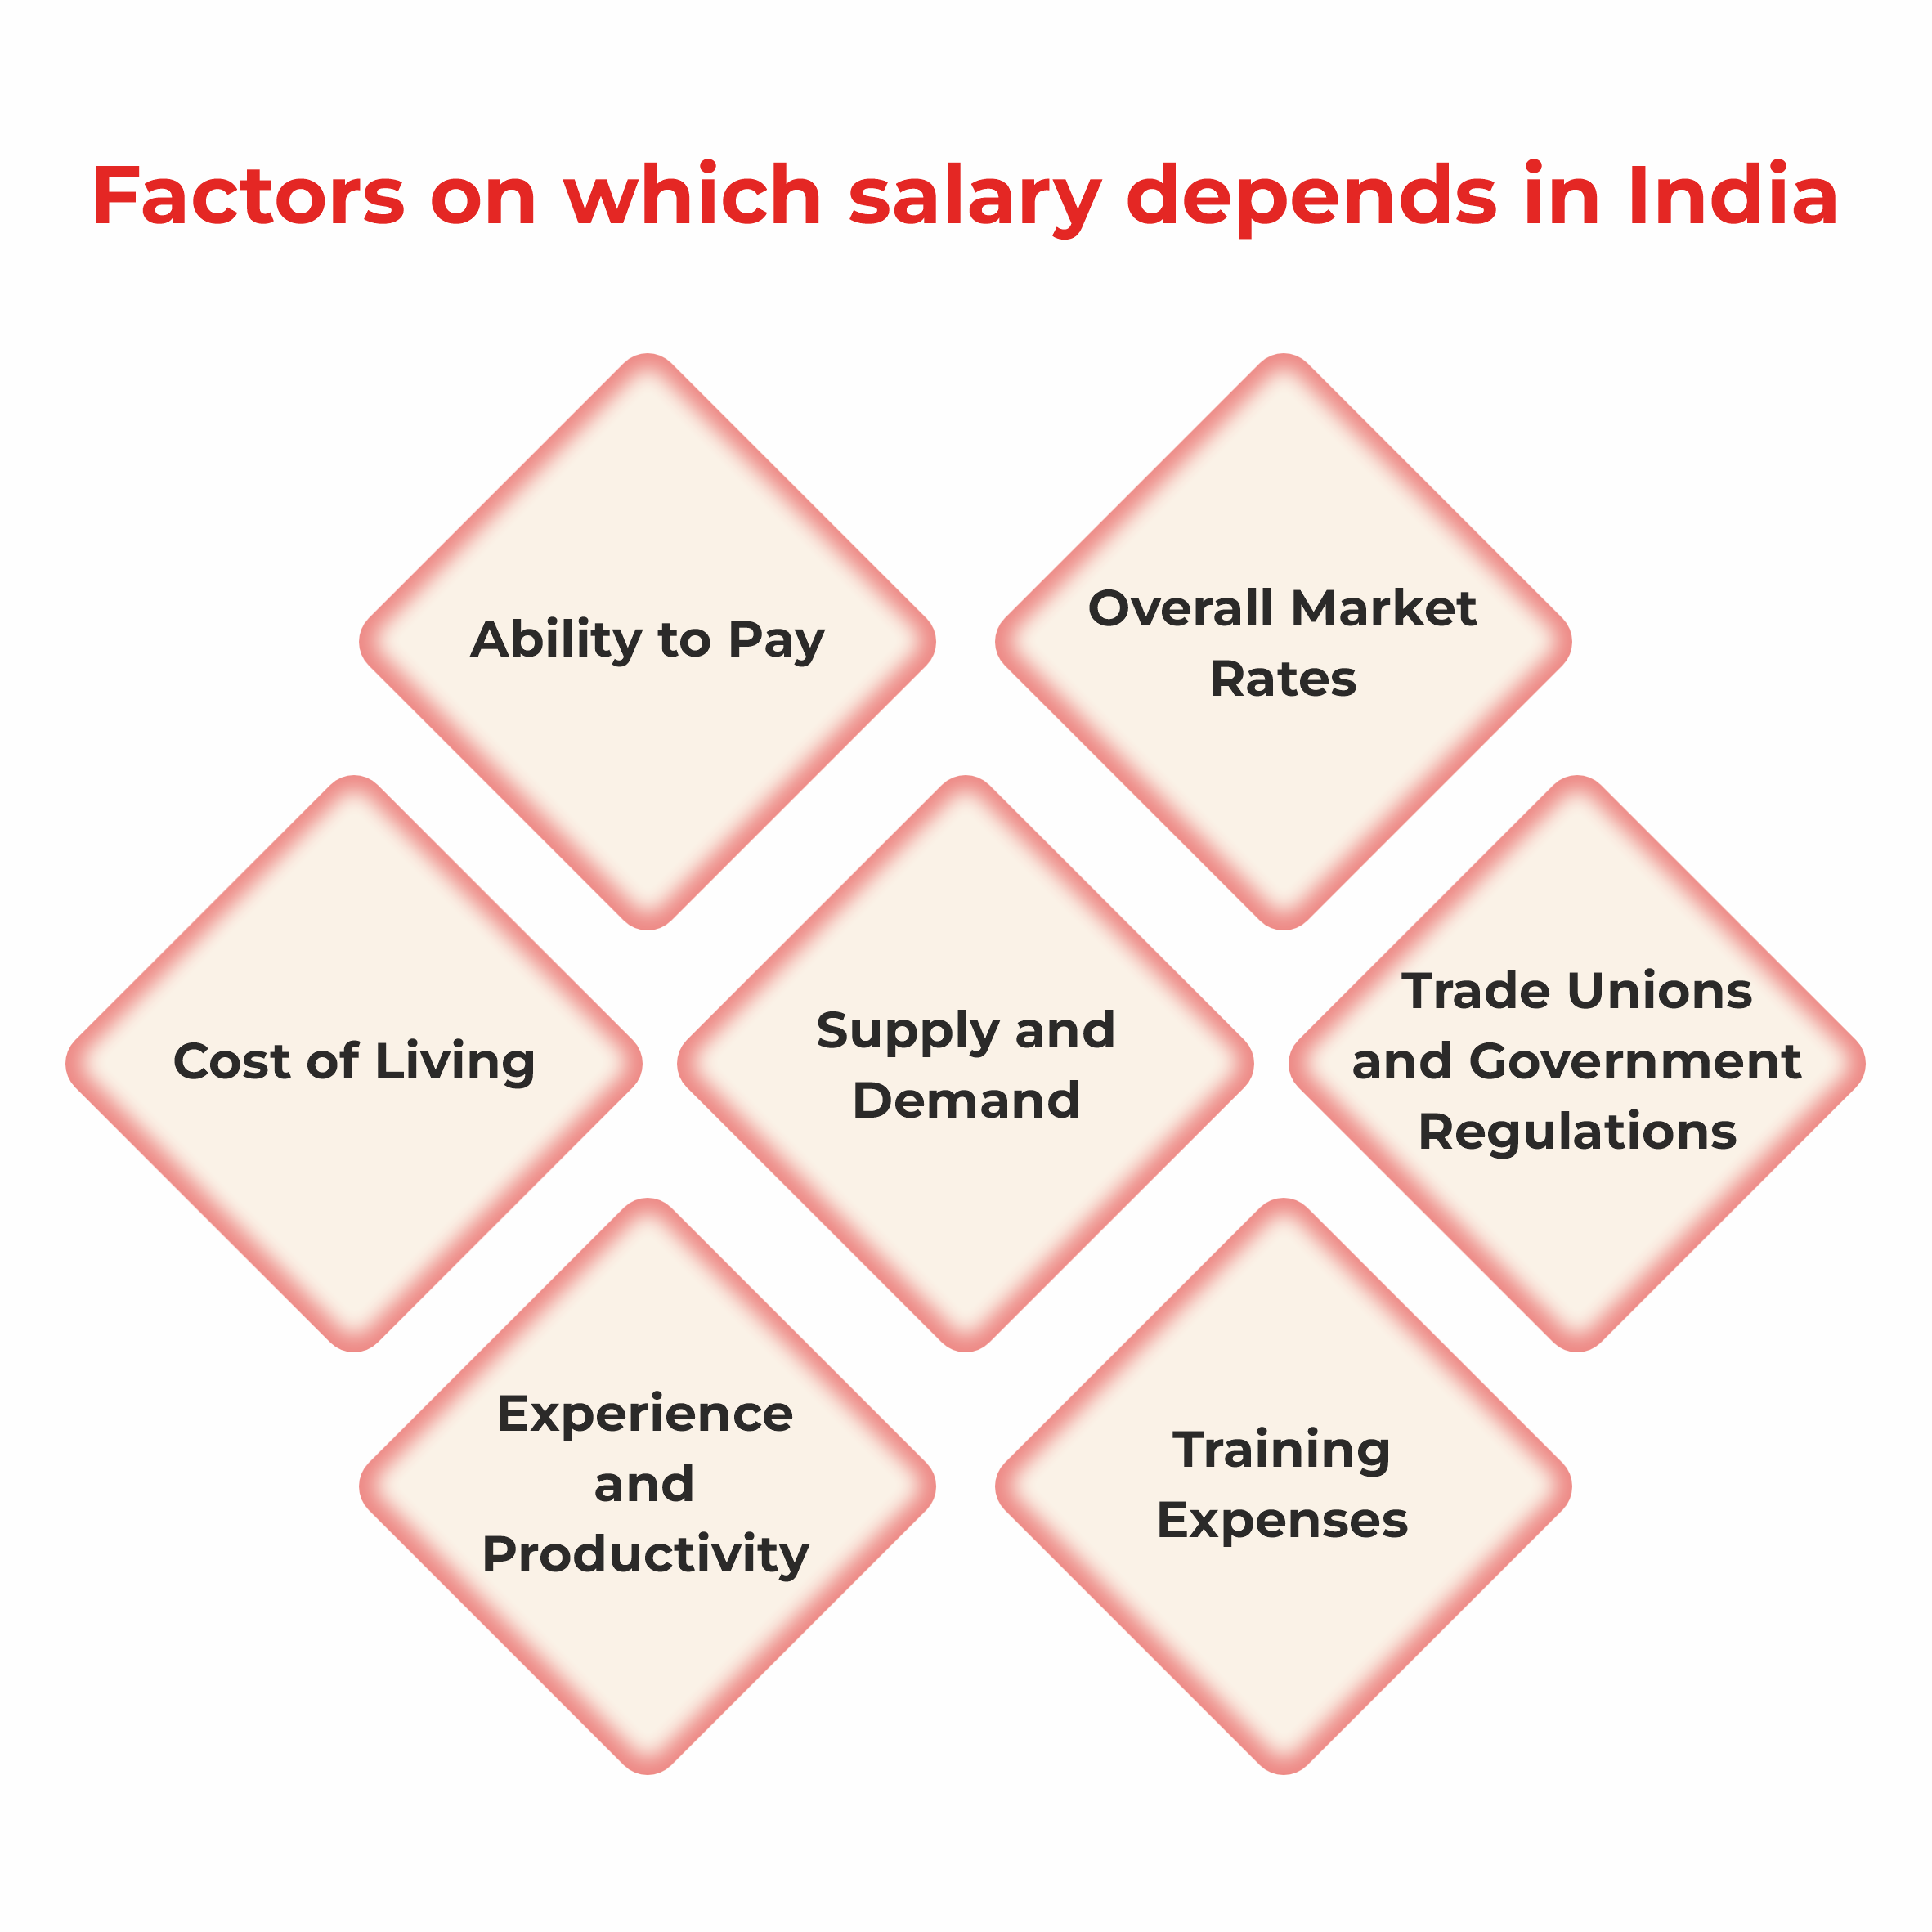 Factors on which salary depends in India